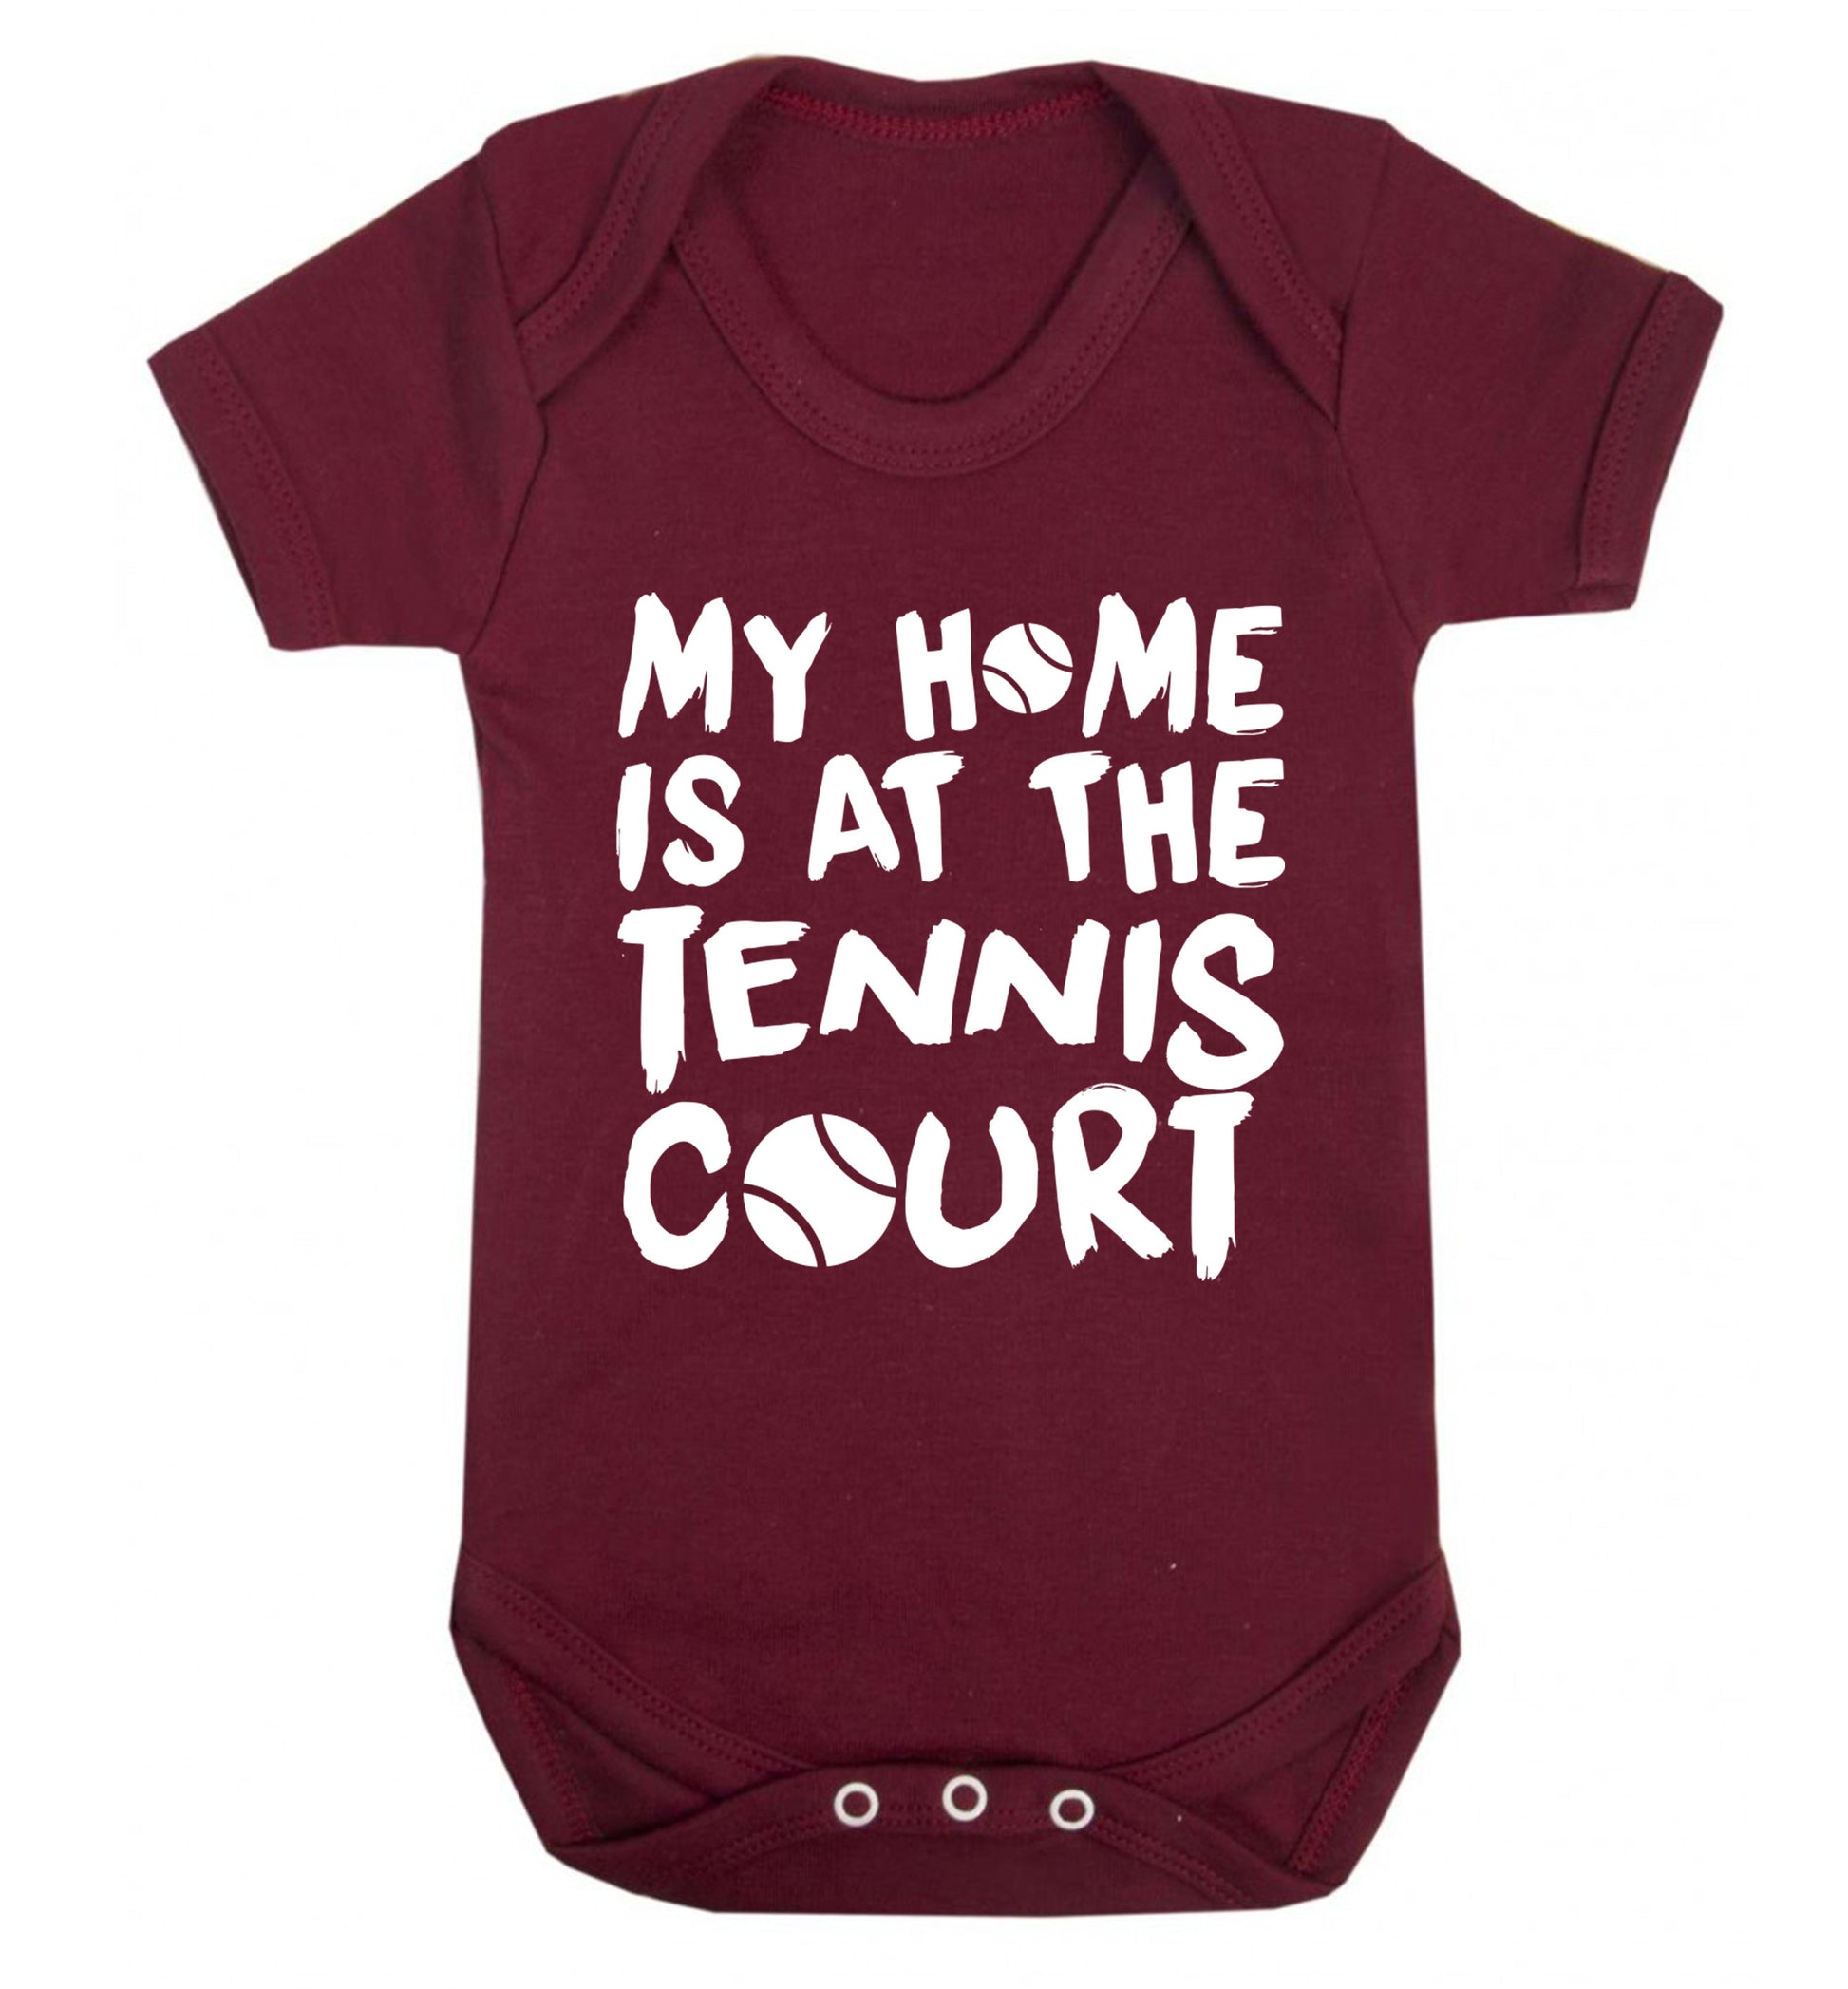 My home is at the tennis court Baby Vest maroon 18-24 months